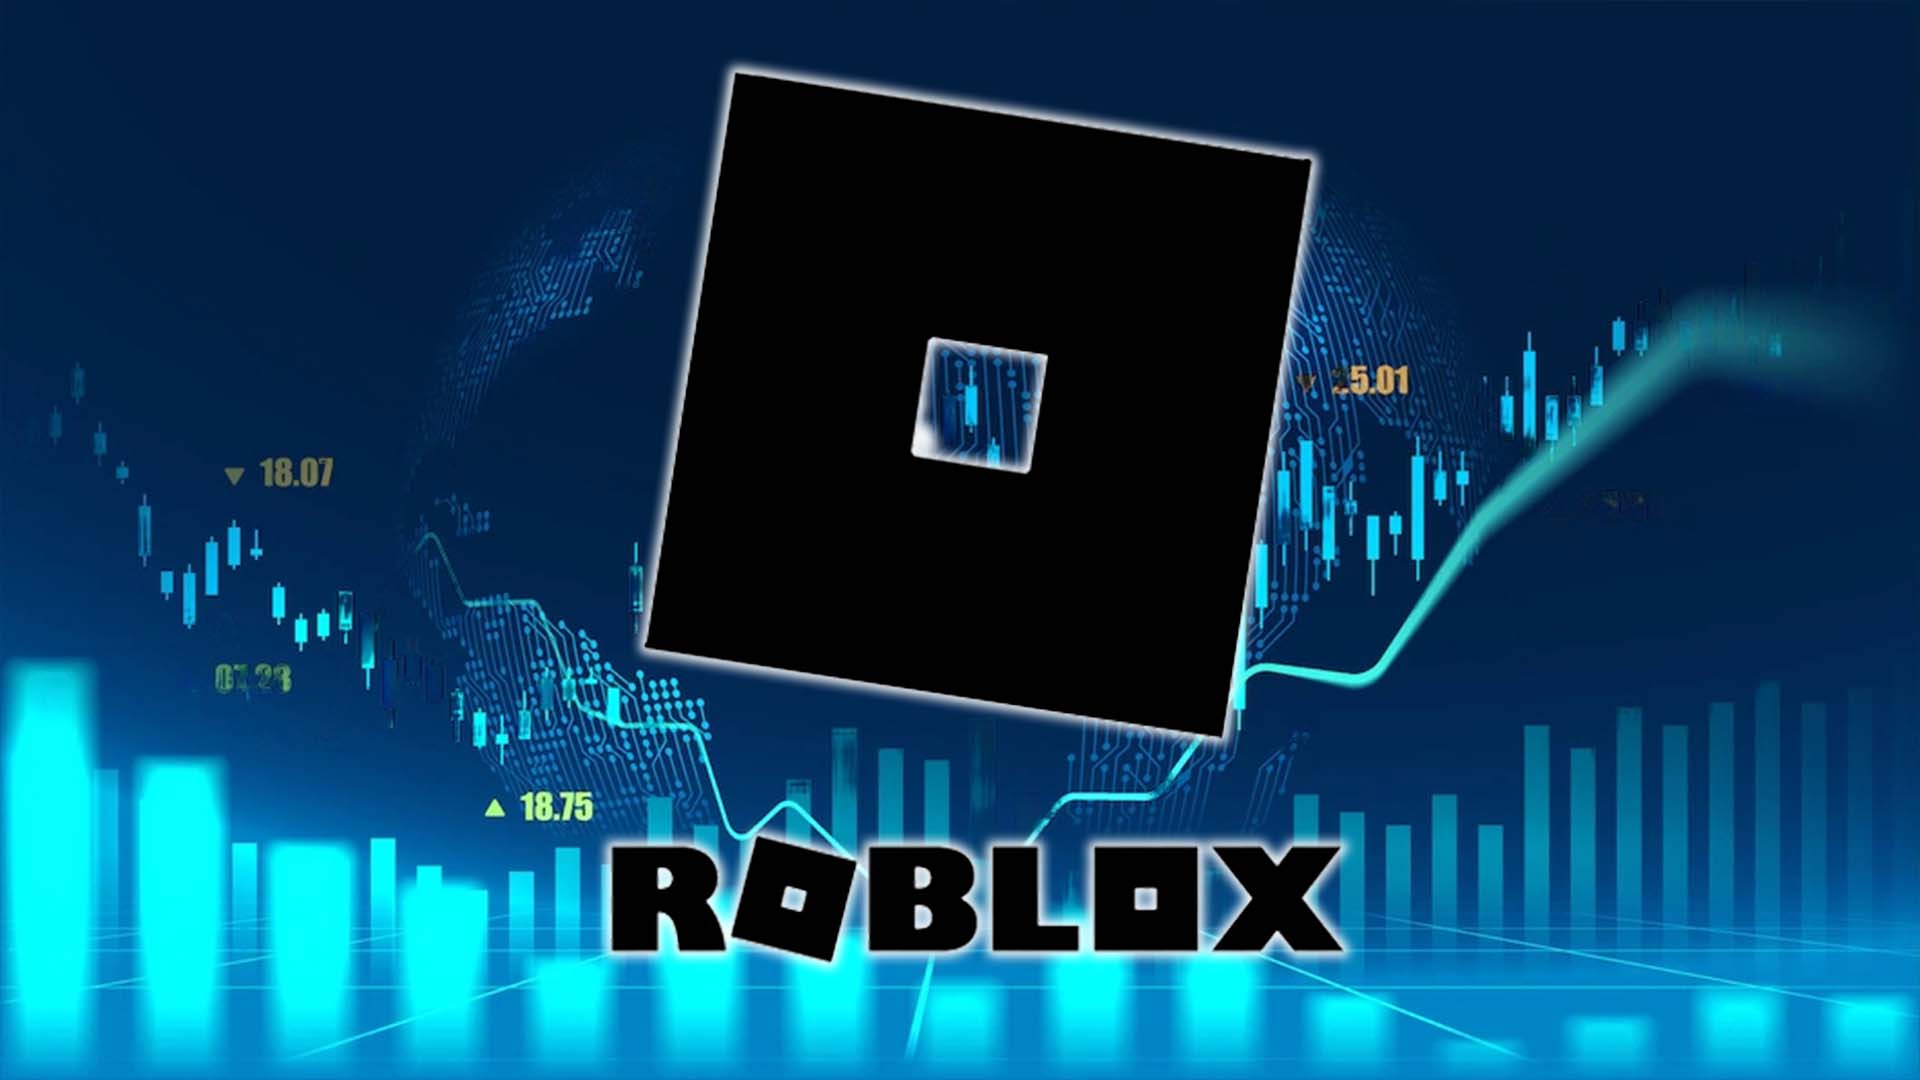 Roblox Corporation - (RBLX) Price Target Increased by 11.91% to 42.49